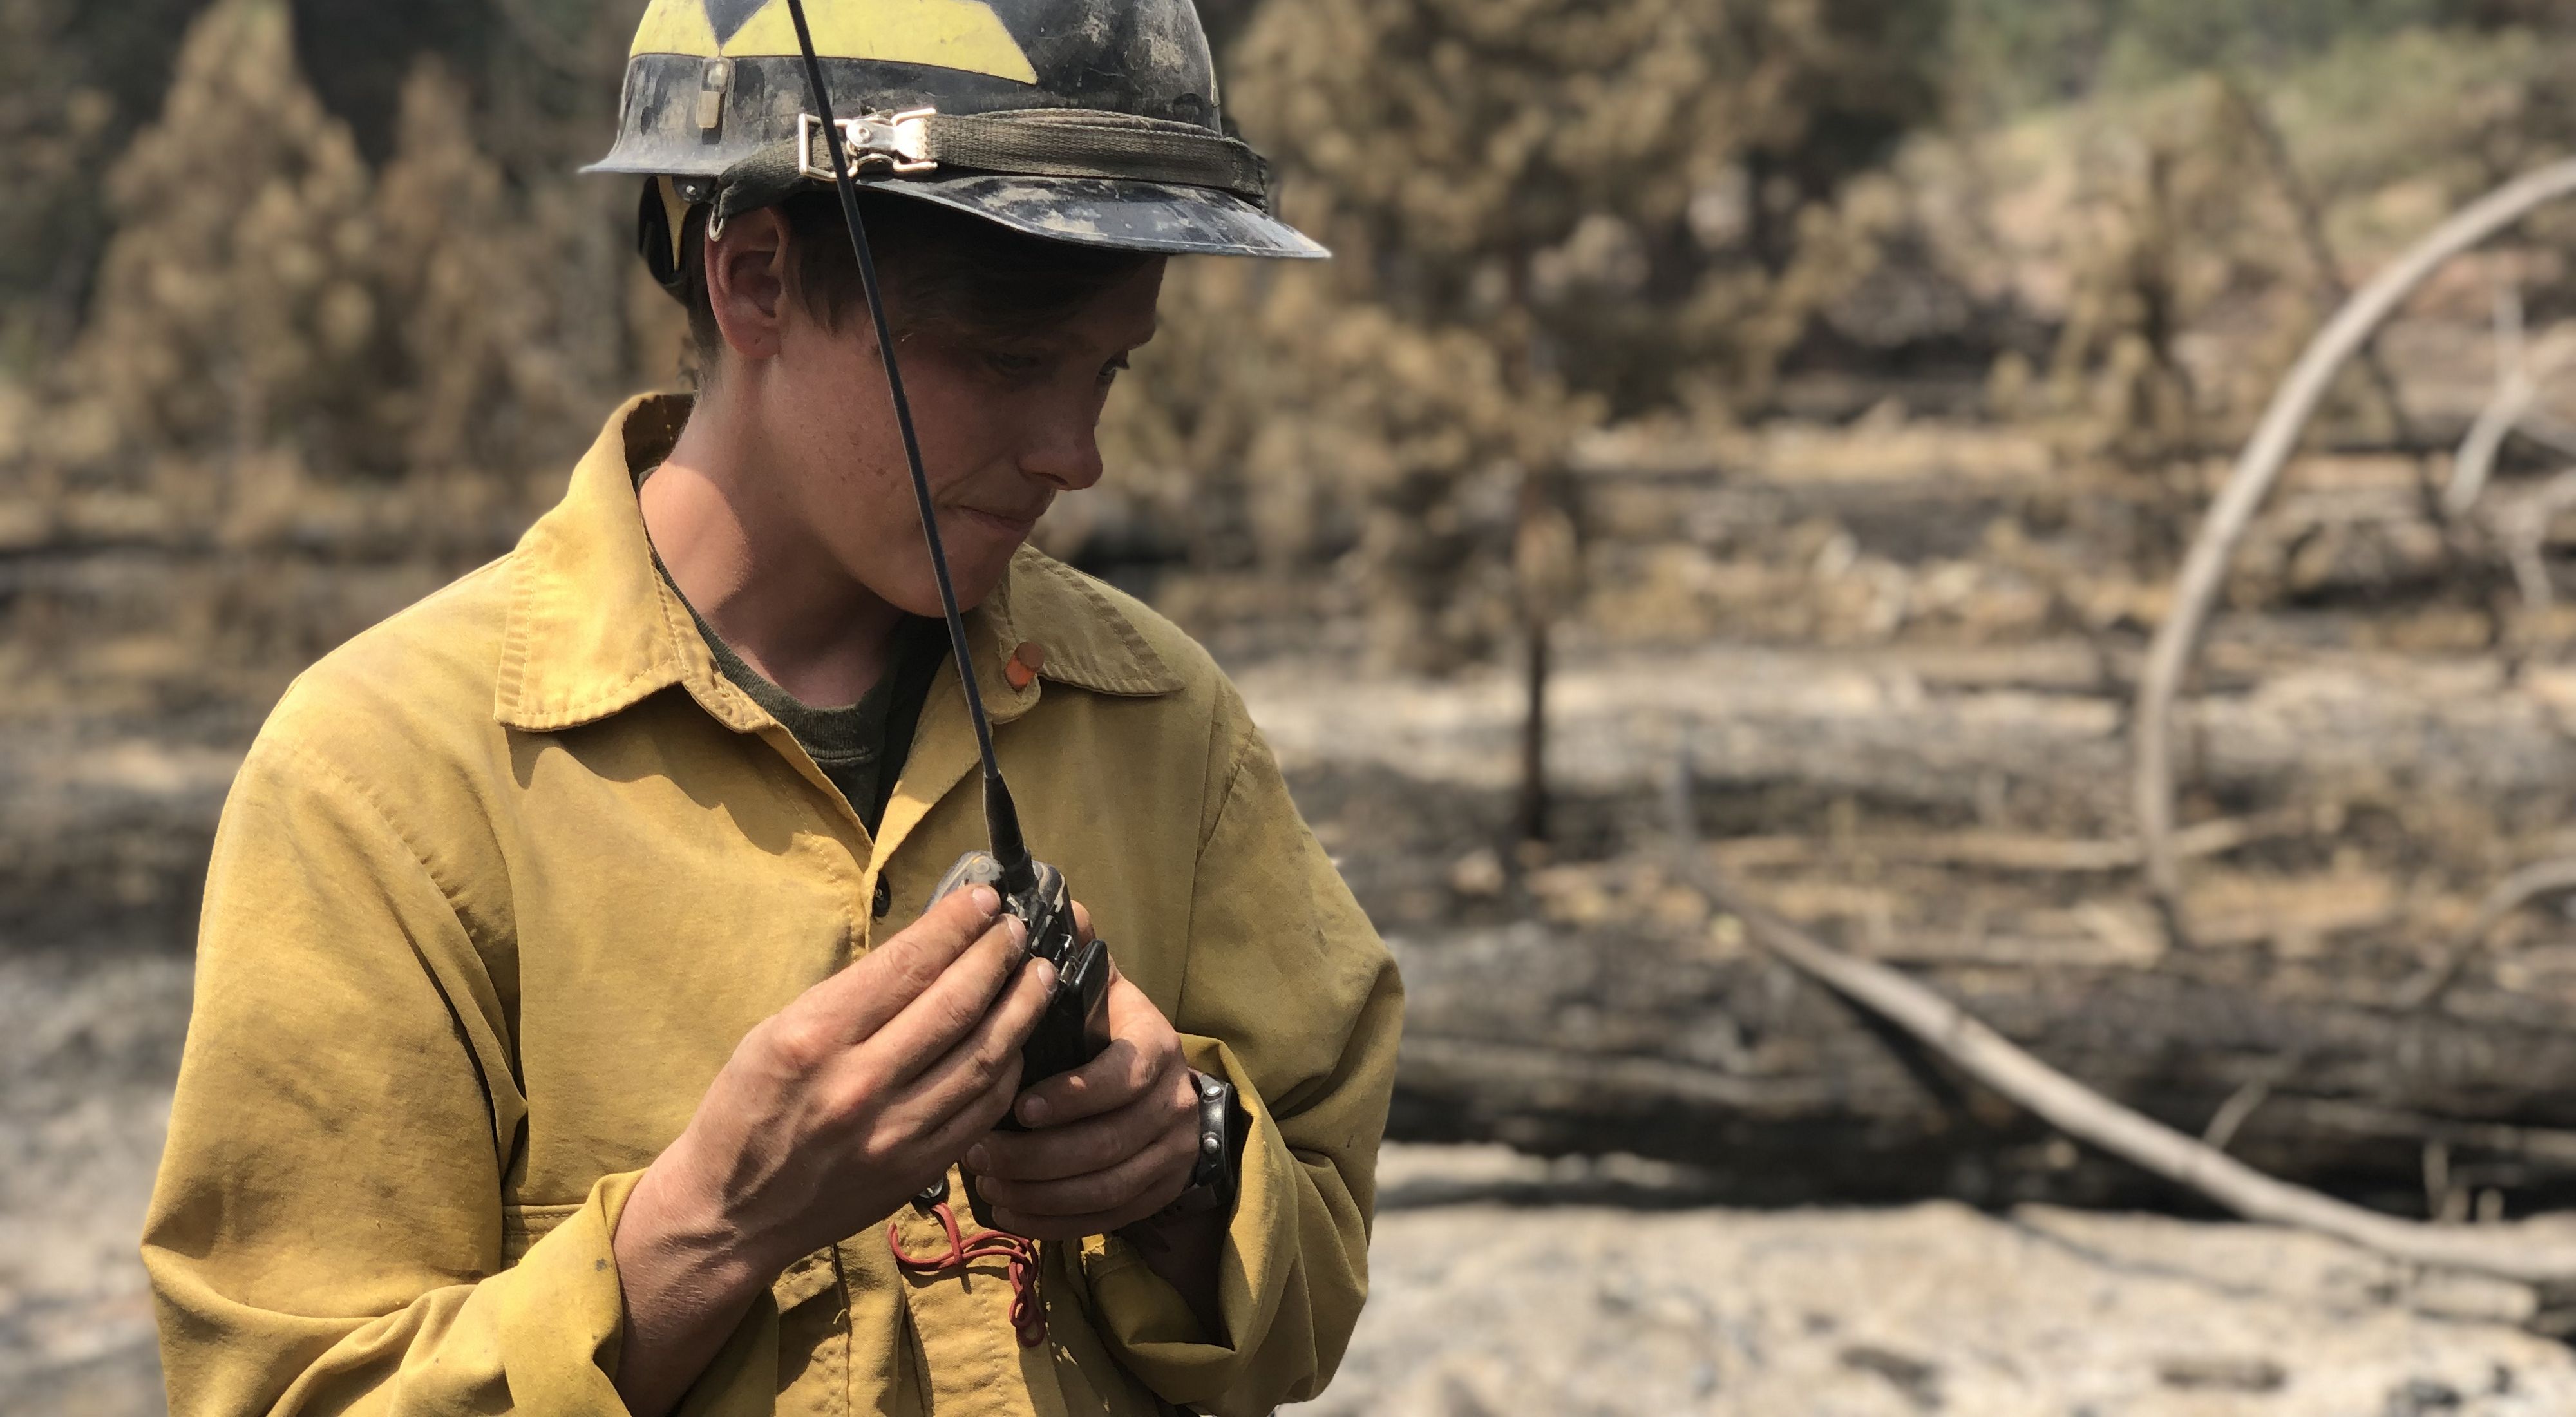 TNC Oregon Fire Program Director Katie Sauerbrey stands in a forest and listens to a walkie talkie; she is wearing fire-protective clothing and a hard hat.